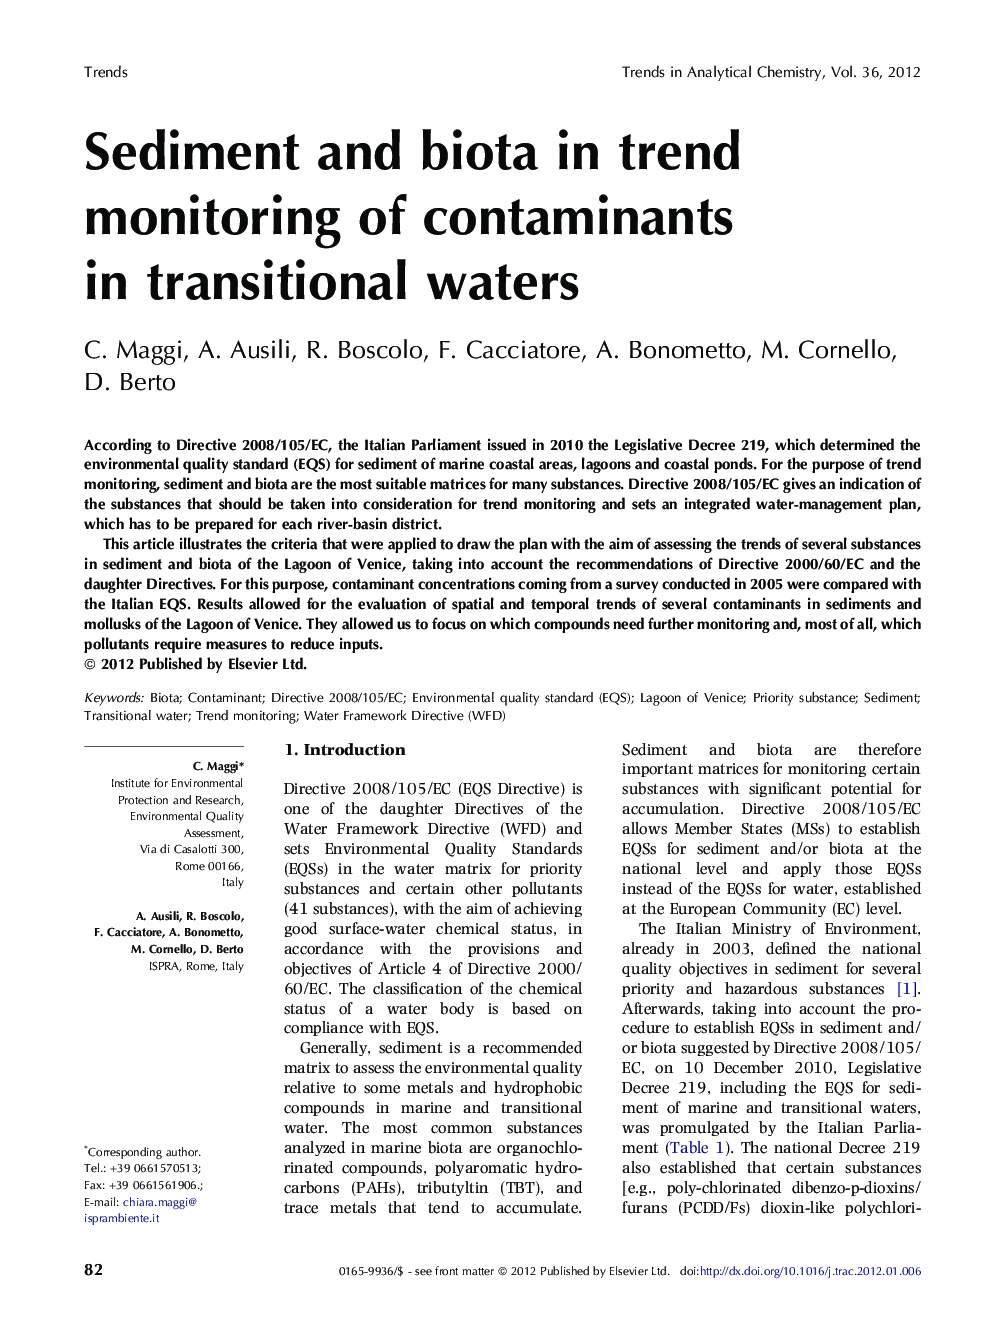 Sediment and biota in trend monitoring of contaminants in transitional waters